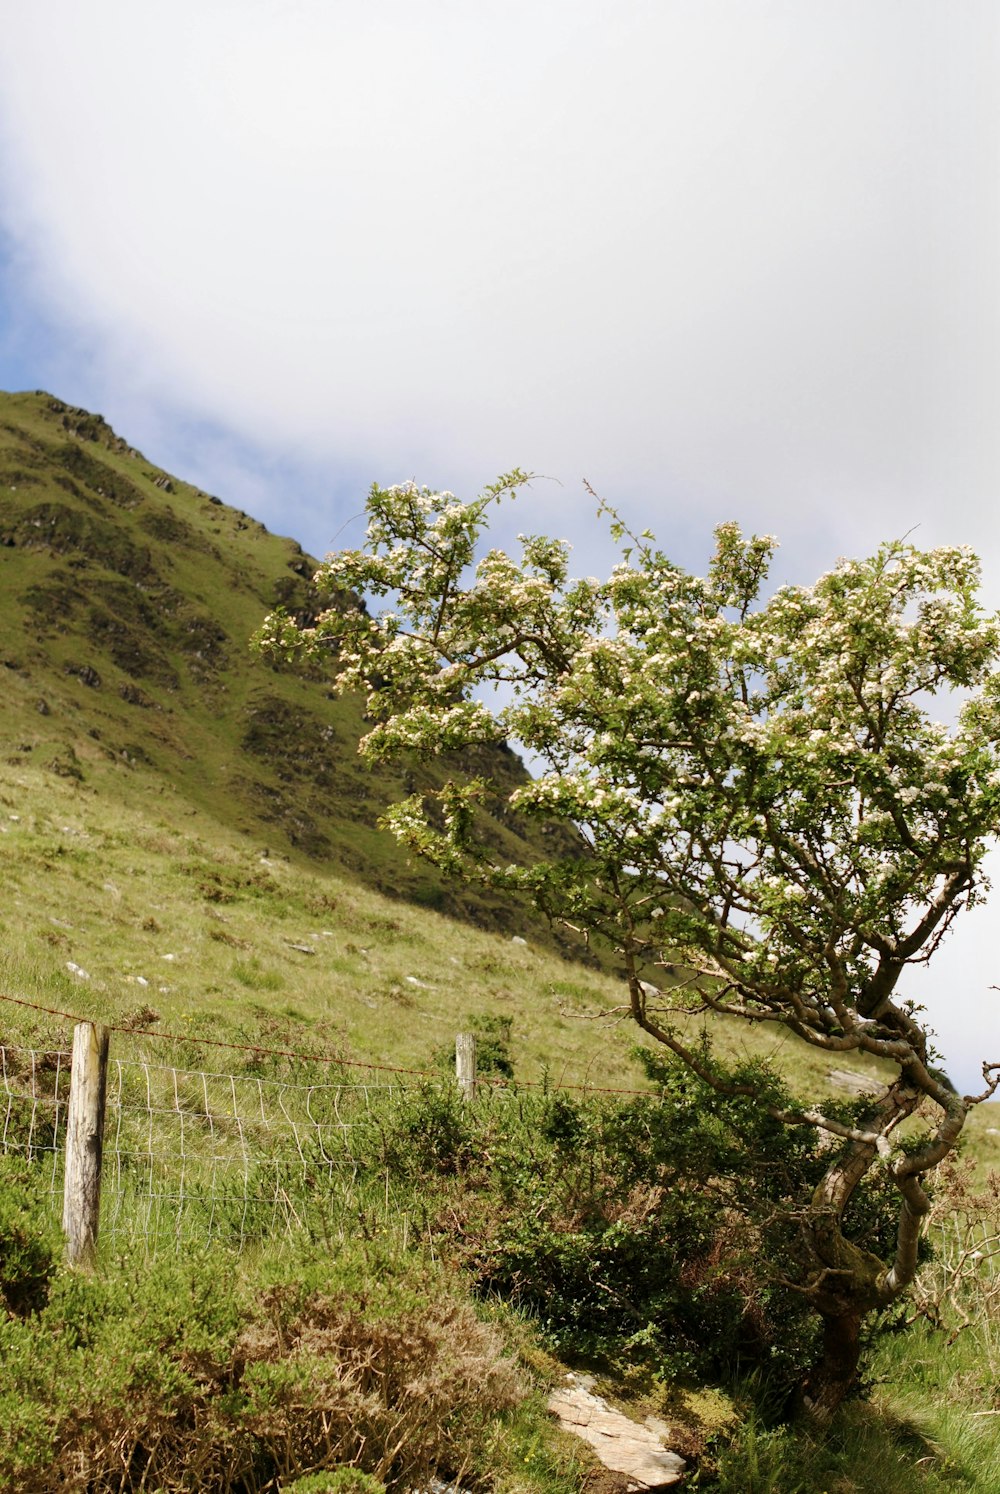 a tree on a hill with a fence in the foreground